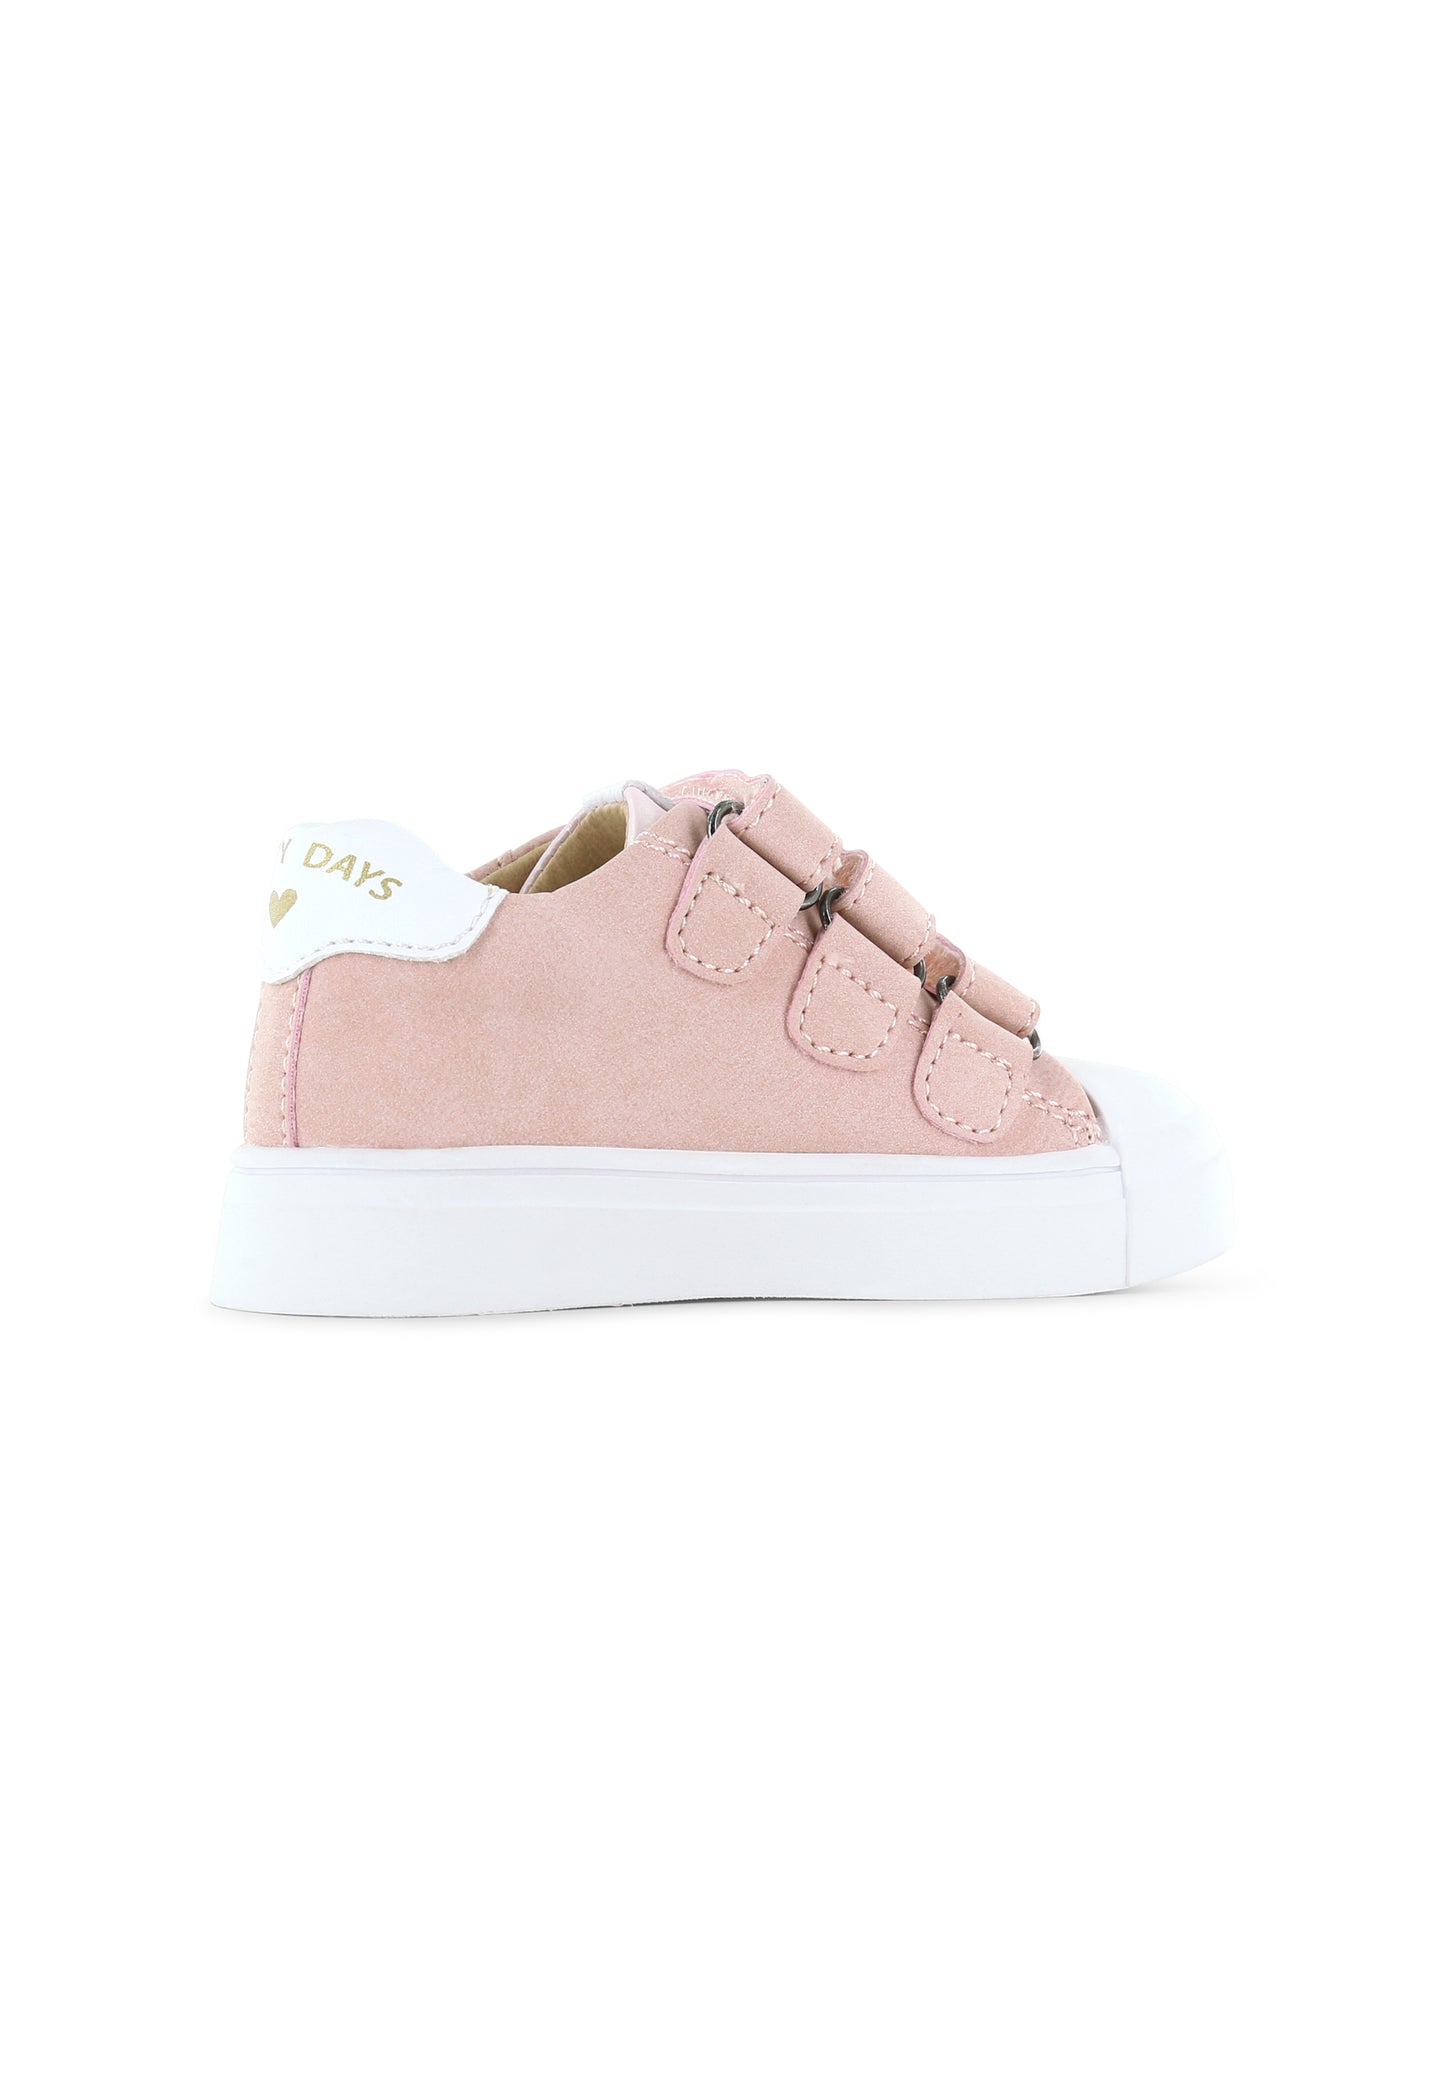 Pink Leather Riptape Sneaker Style Casual Shoe